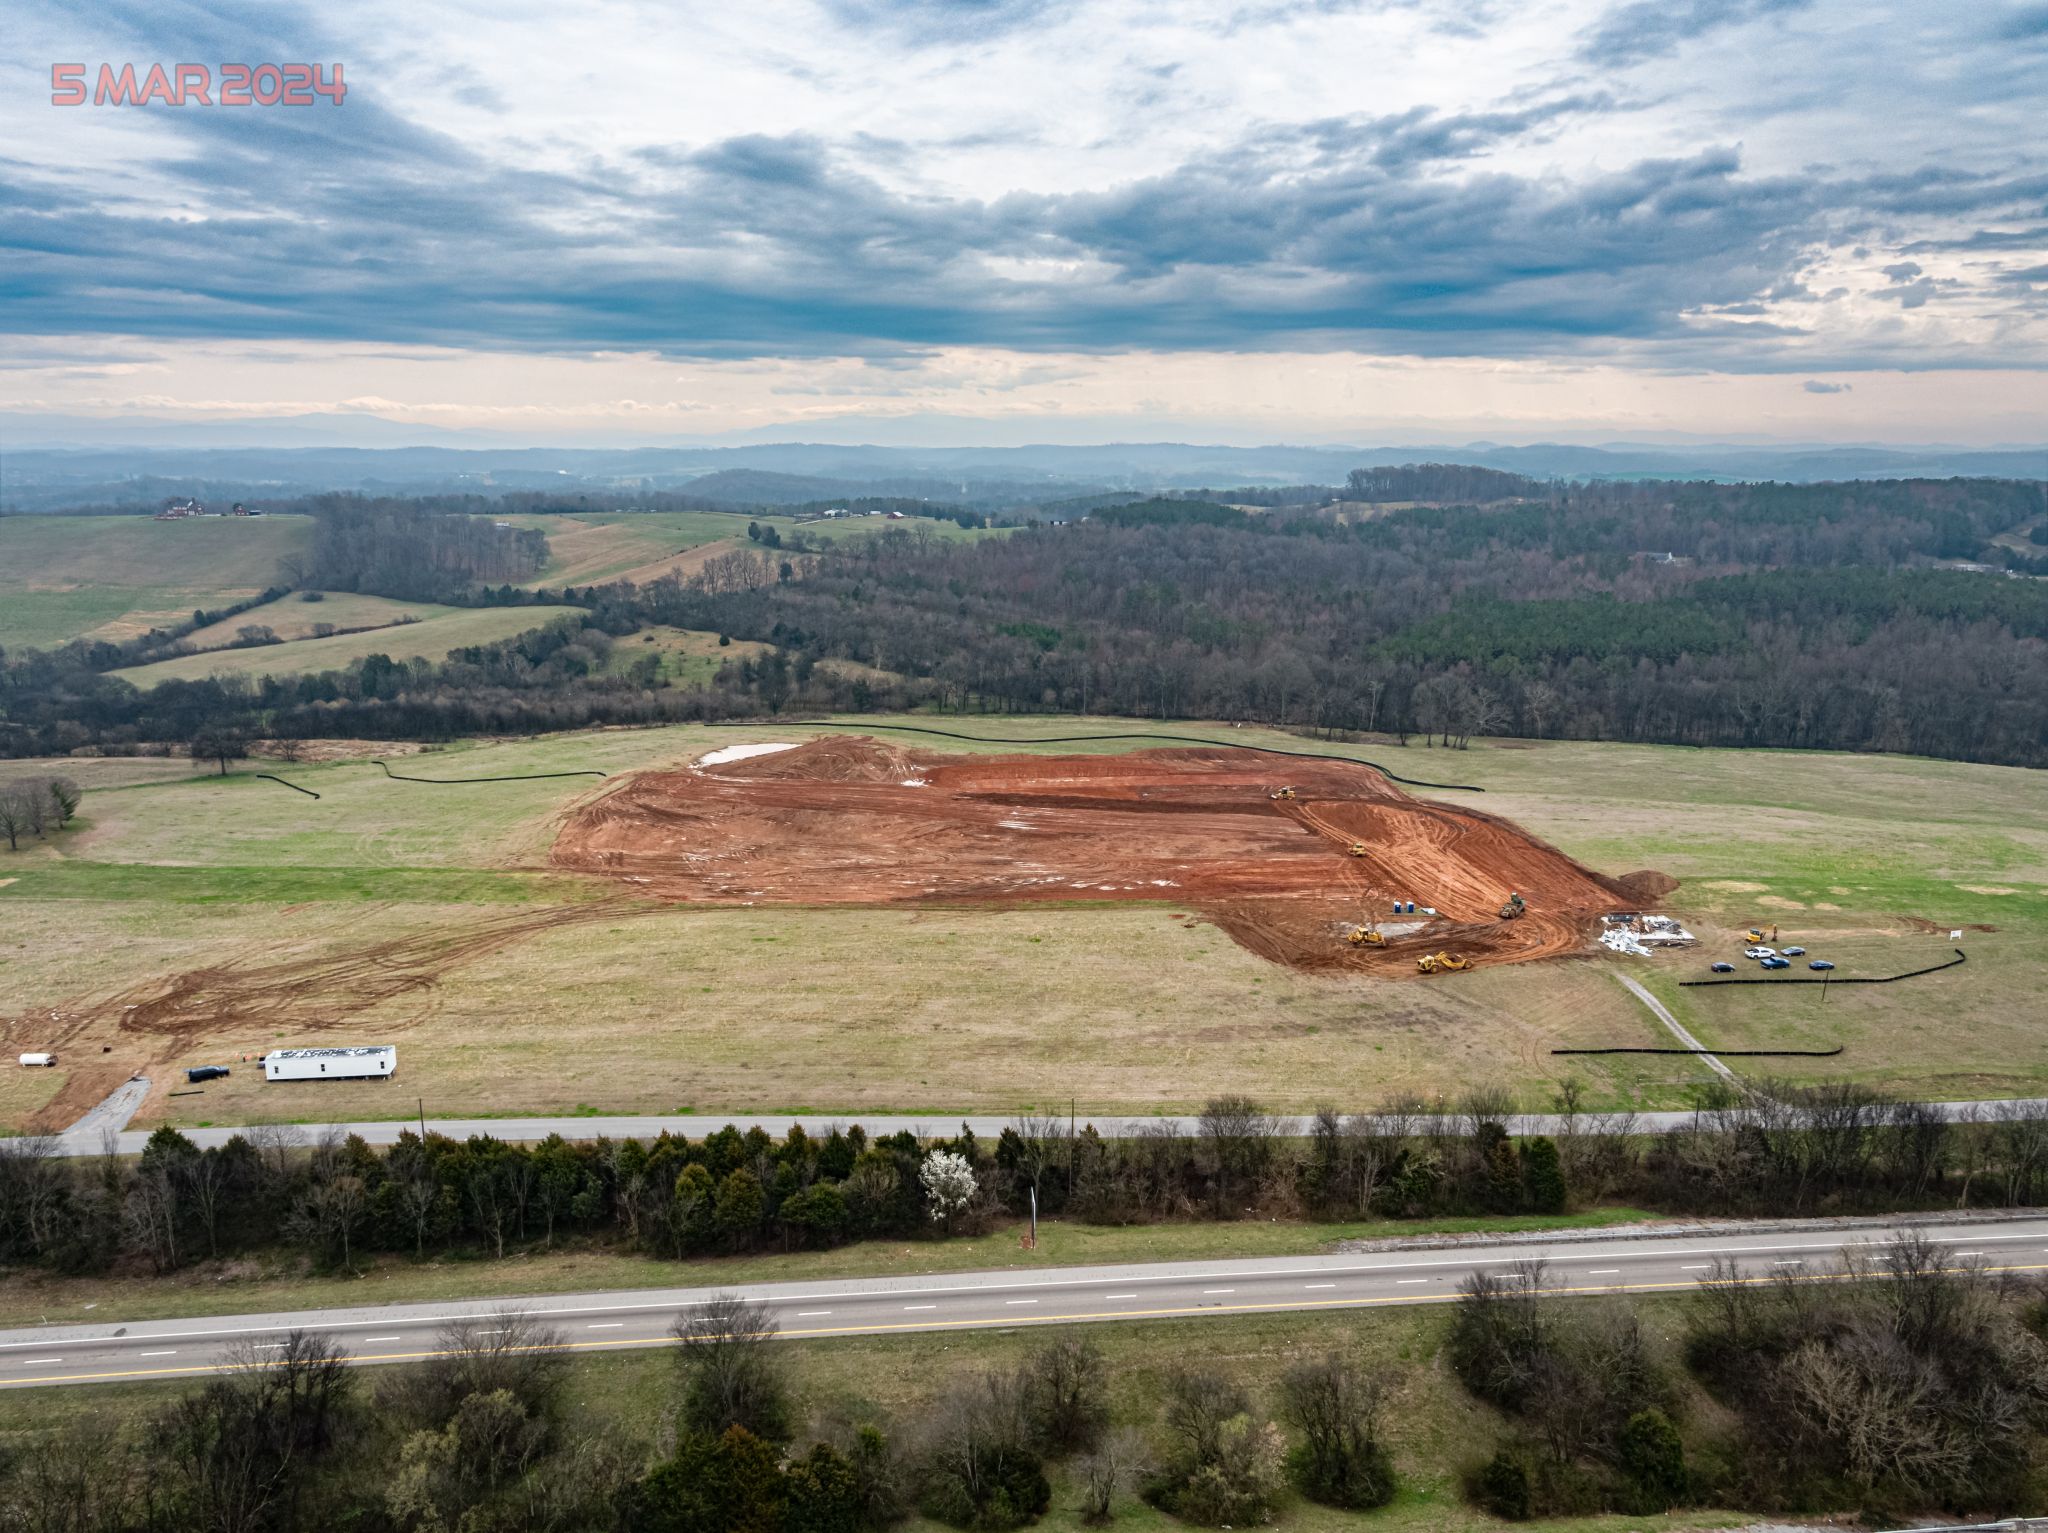 Aerial view of the plot of land under construction for Weigel's new commissary